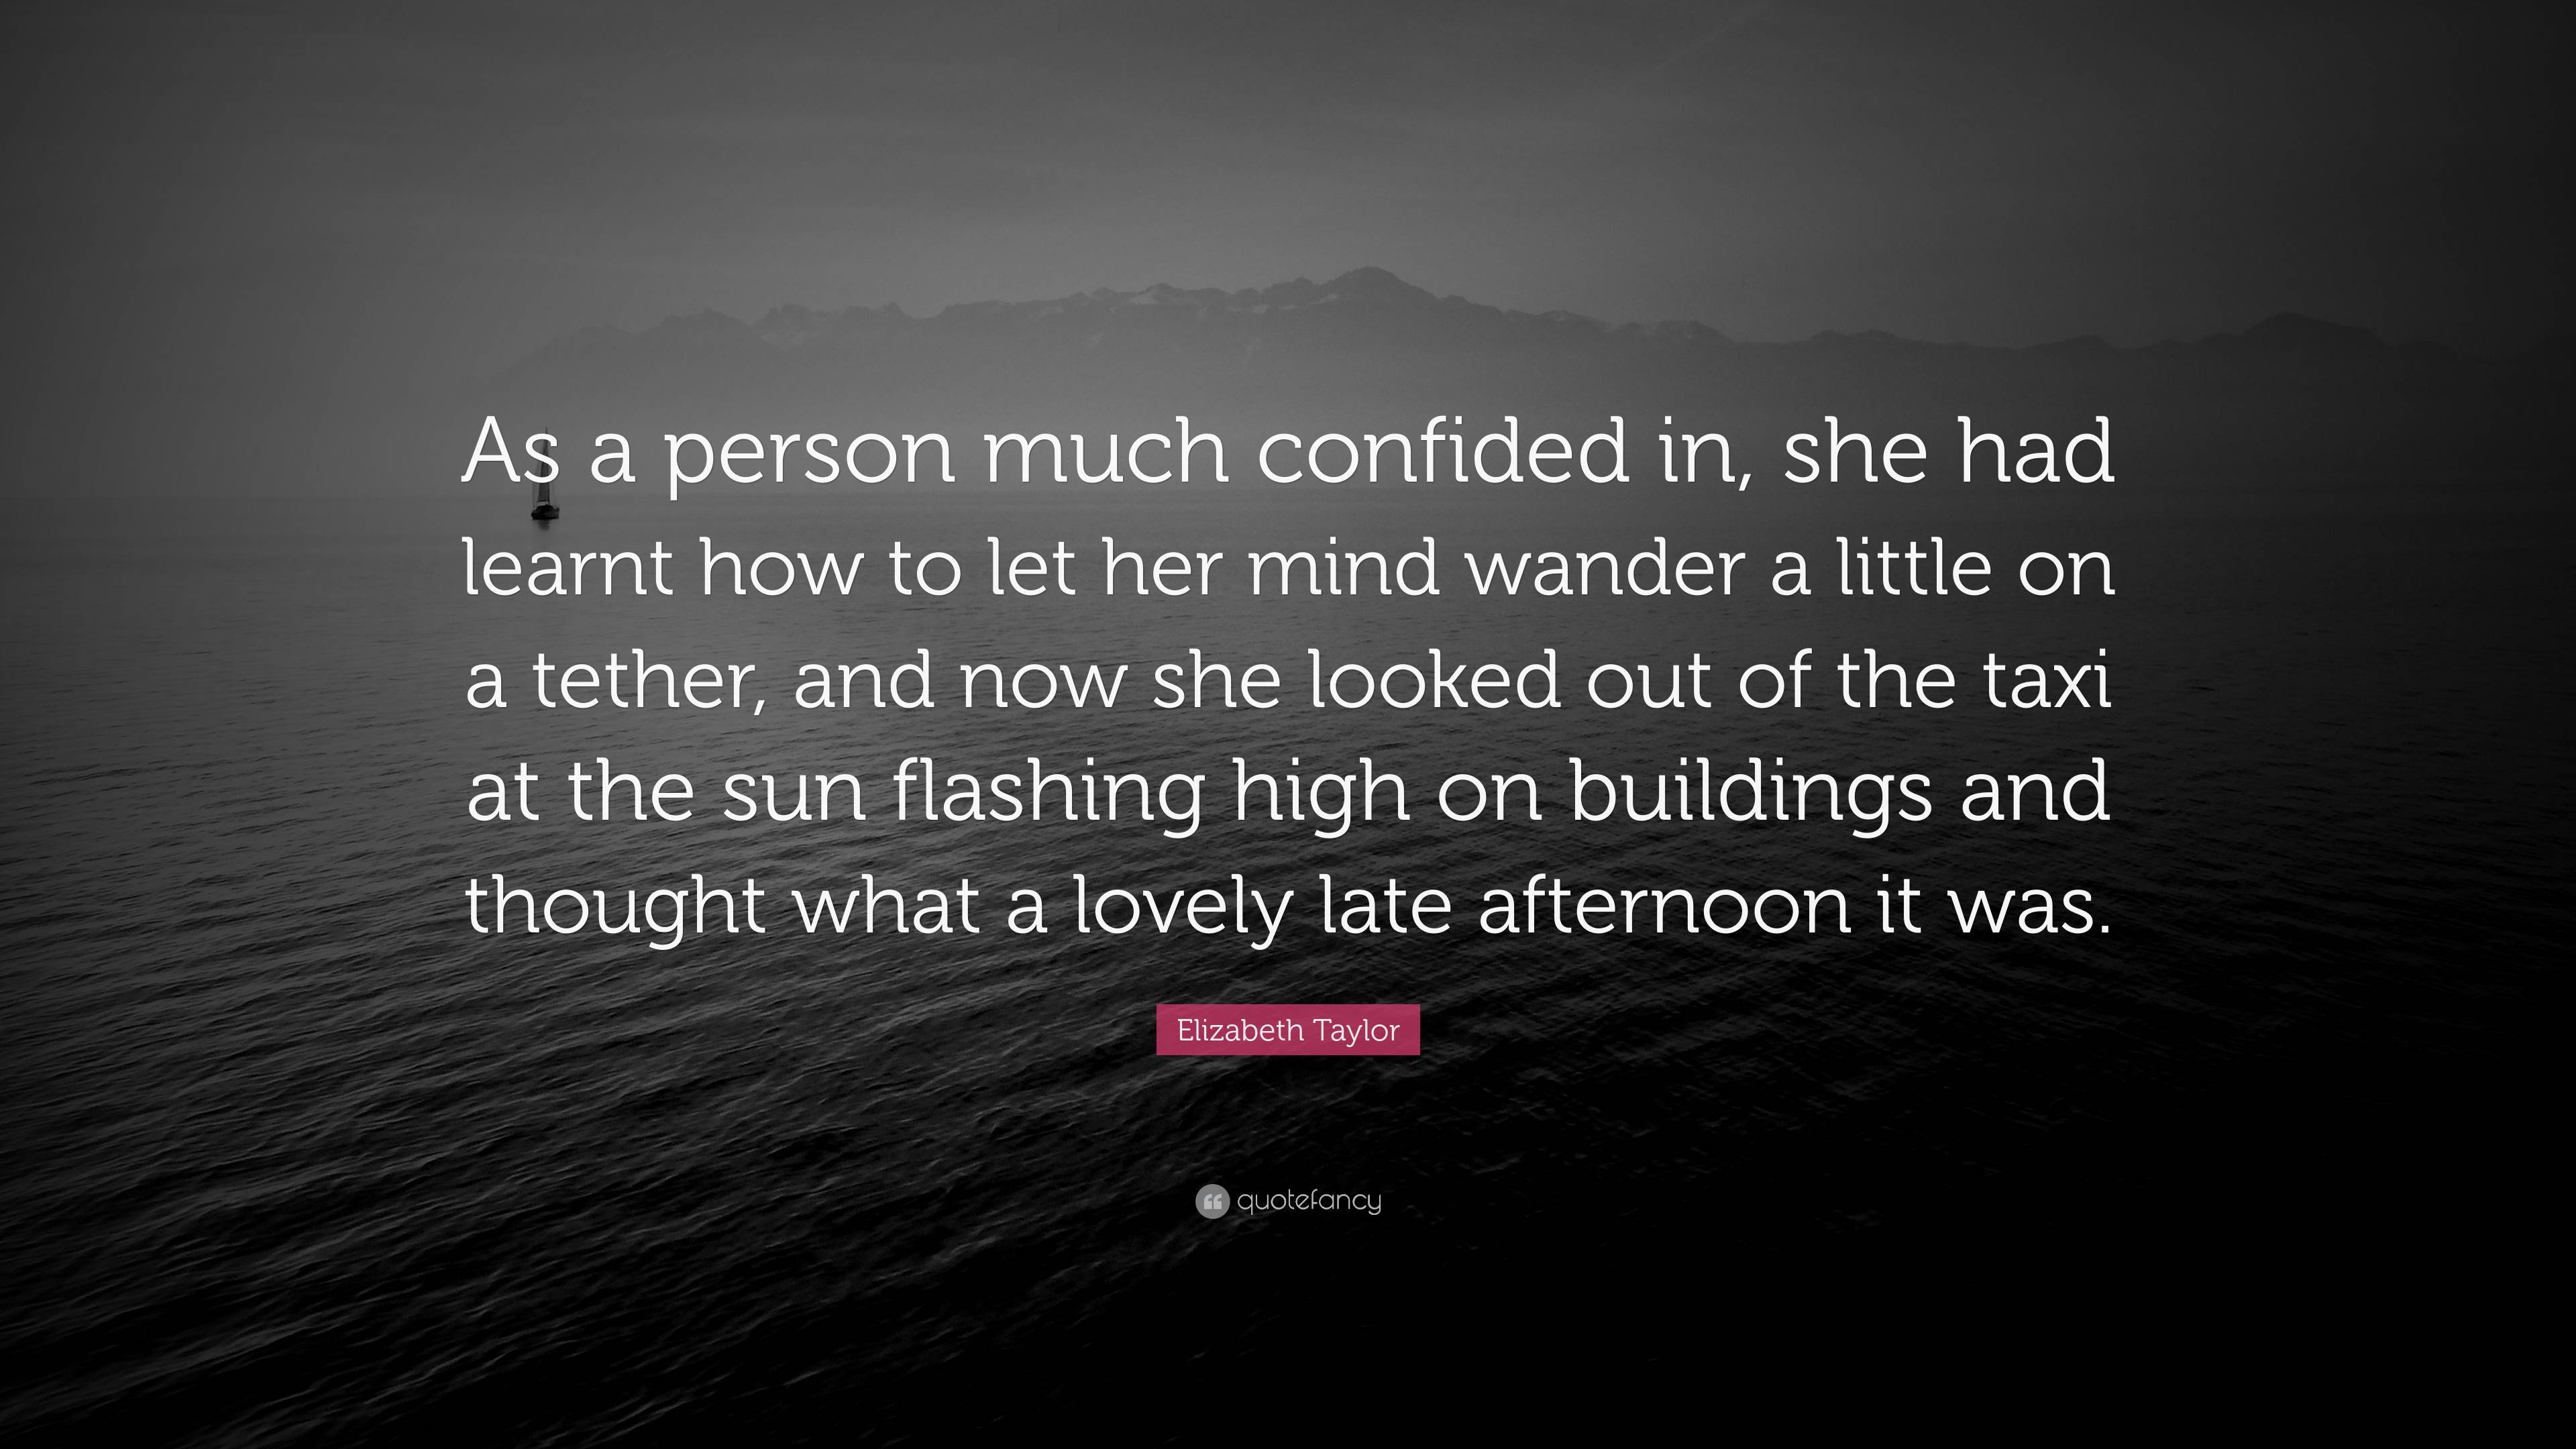 Elizabeth Taylor Quote: “As a person much confided in, she had learnt ...